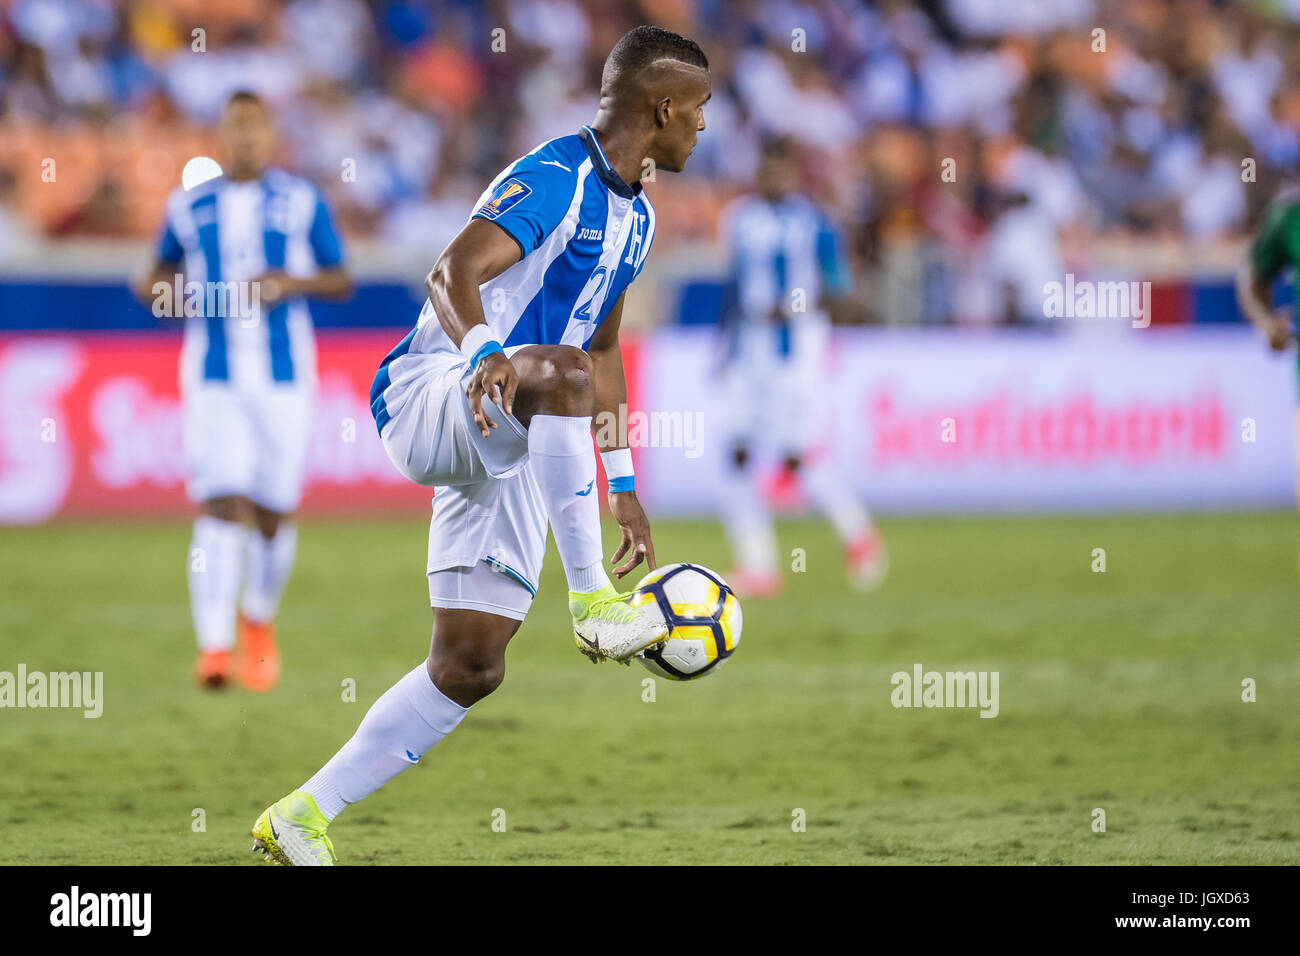 Houston, Texas, USA. 11th July, 2017. Honduras defender Brayan Beckeles (21) controls the ball during the 1st half of an international CONCACAF Gold Cup soccer match between Honduras and French Guiana at BBVA Compass Stadium in Houston, TX on July 11th, 2017. The game ended in a 0-0 draw. Credit: Trask Smith/ZUMA Wire/Alamy Live News Stock Photo